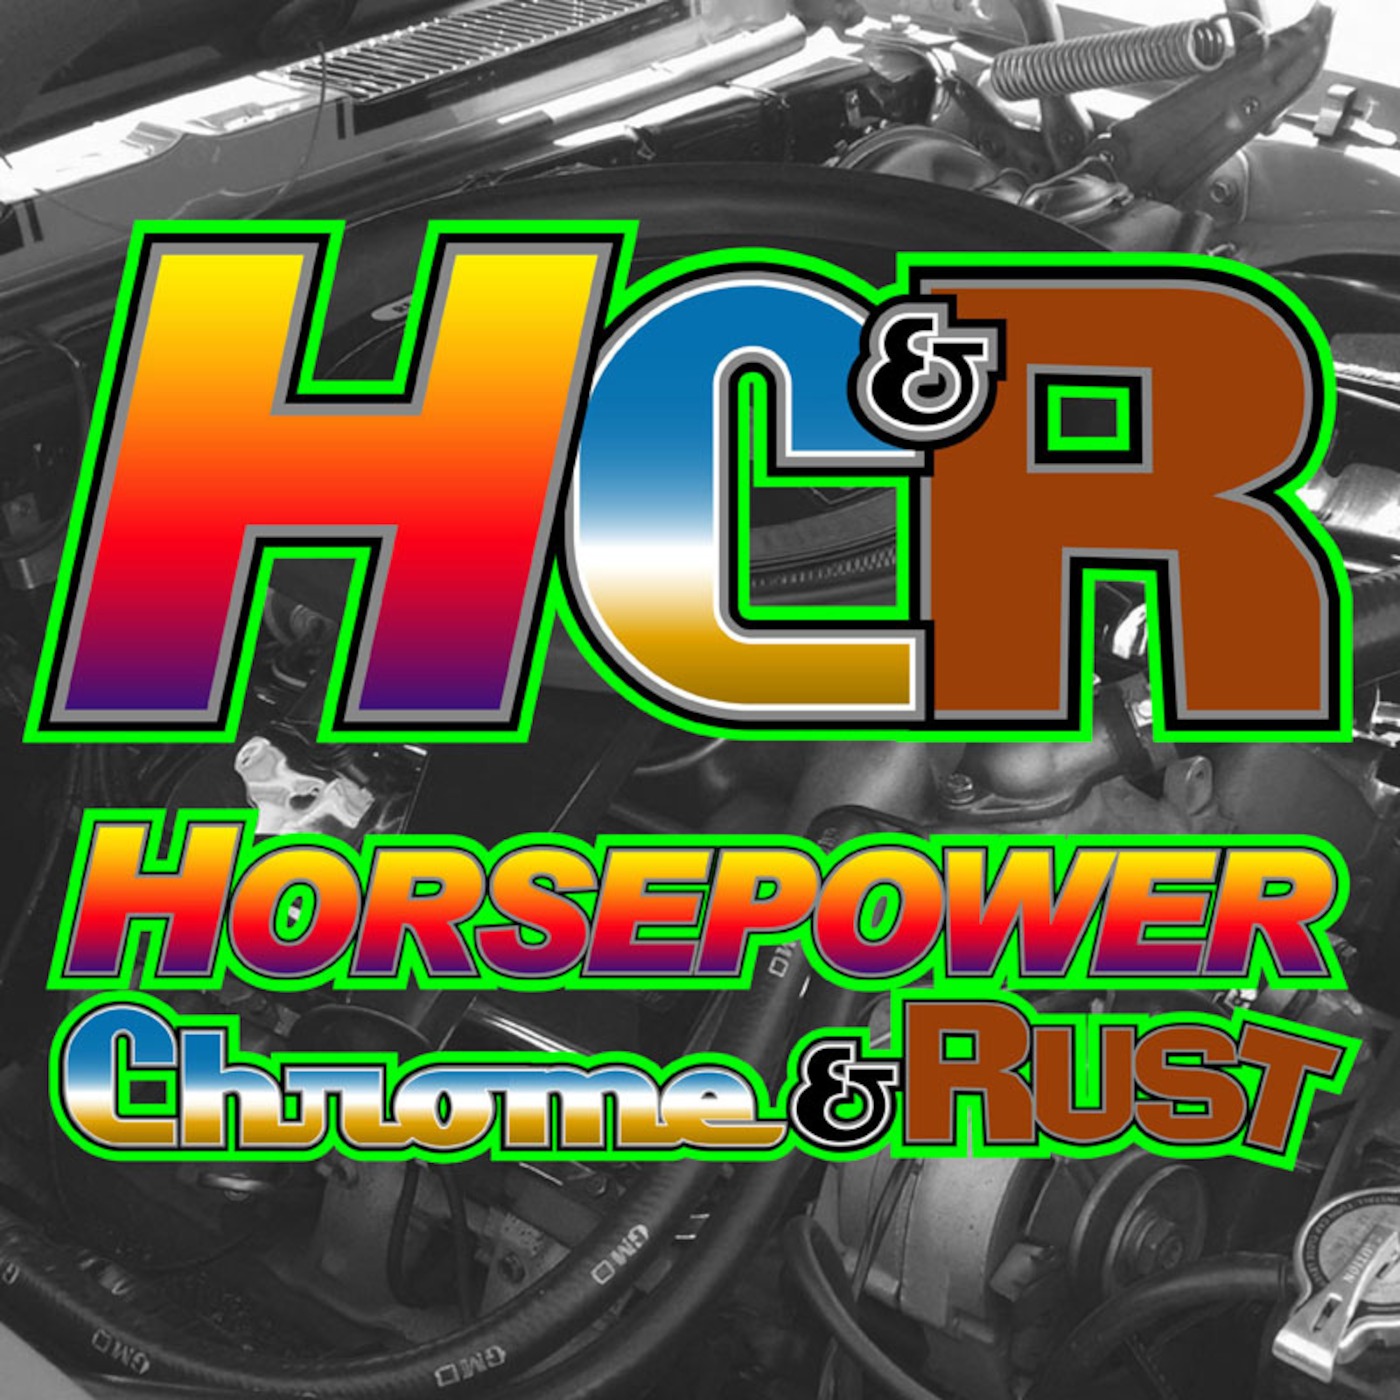 Horsepower Chrome and Rust EP91 Janette Thornley Interview & More June 26 2019